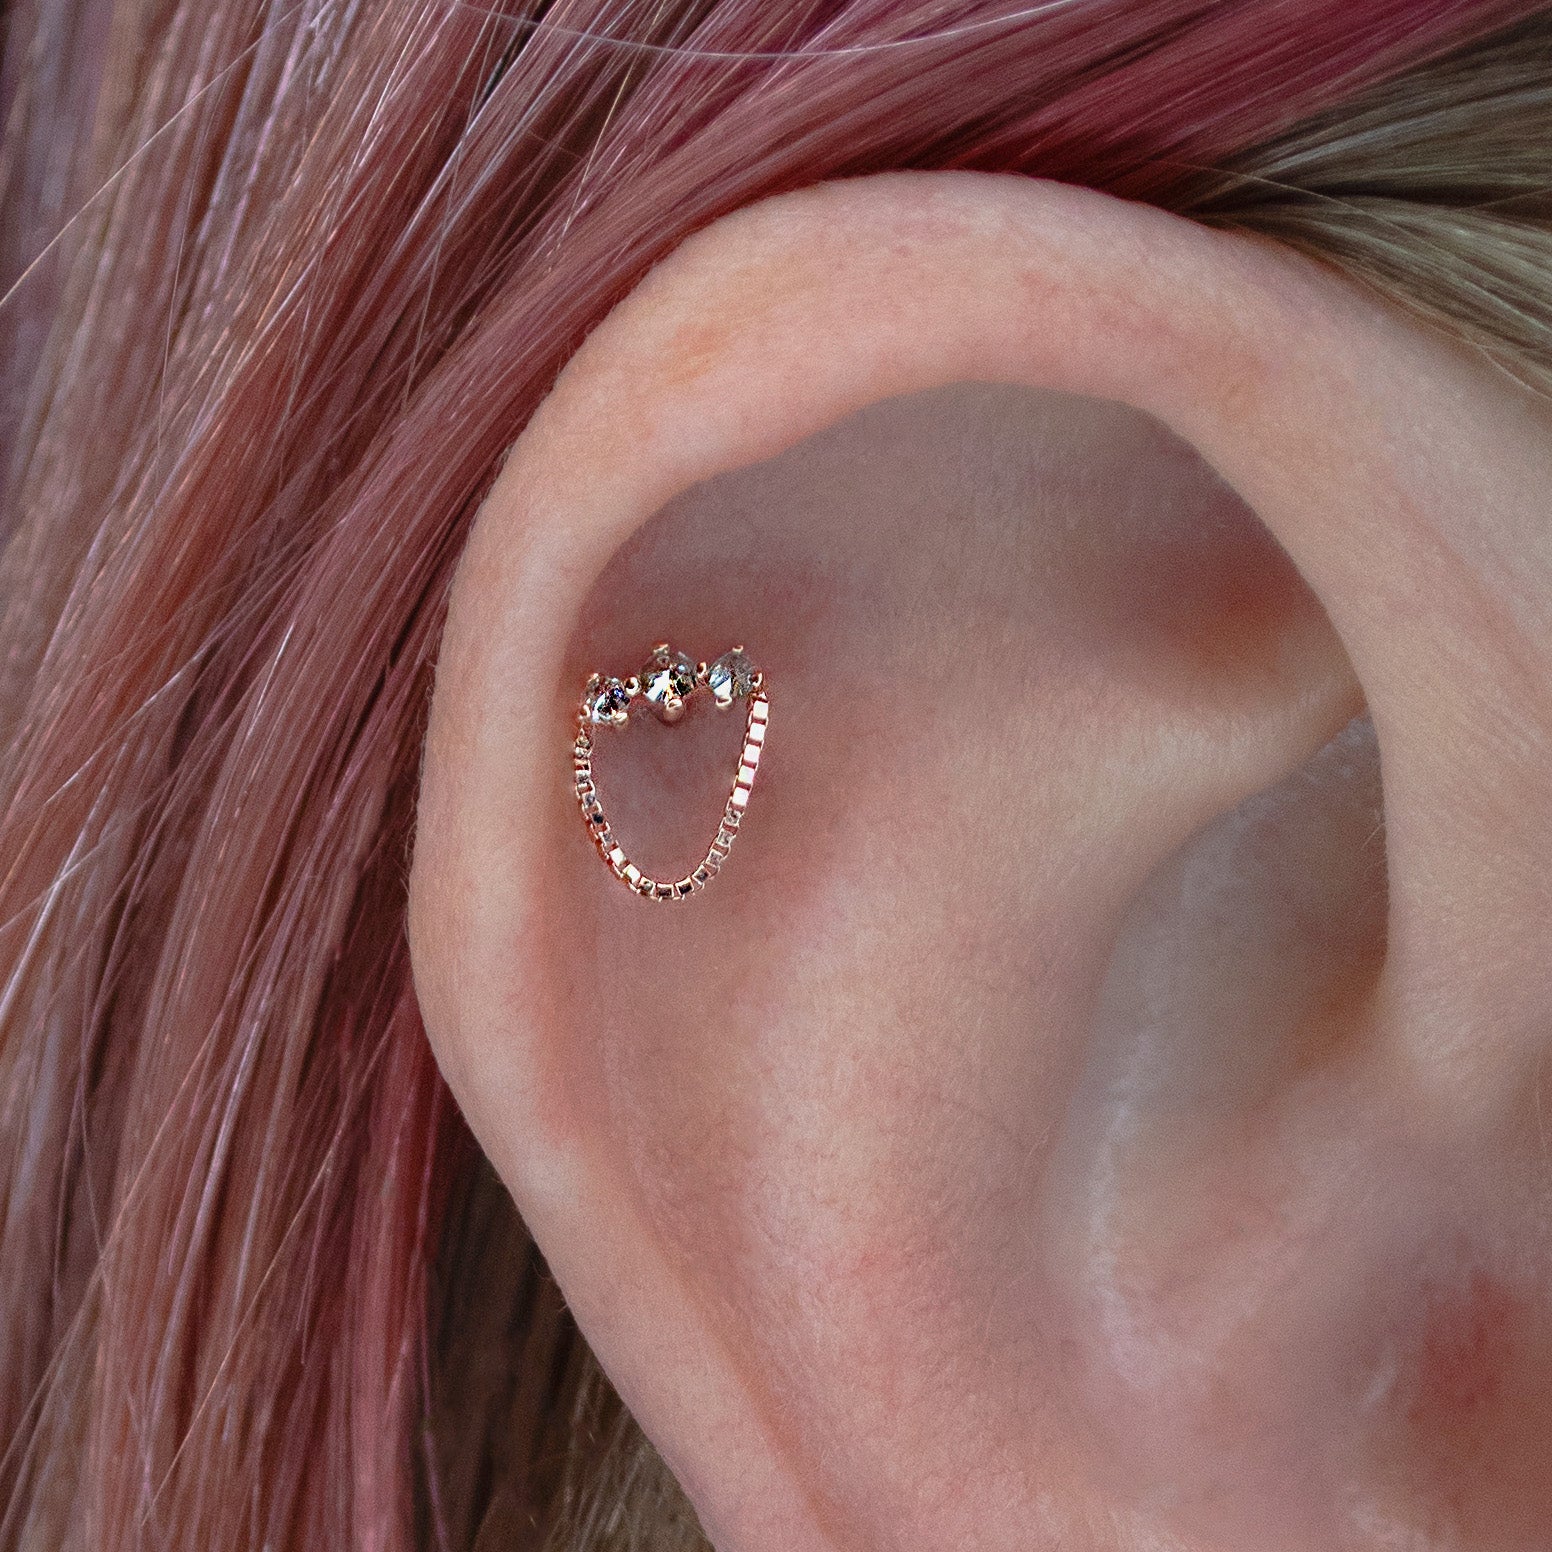 Halston CZ + Chain - Threadless End for Piercings Rose Gold